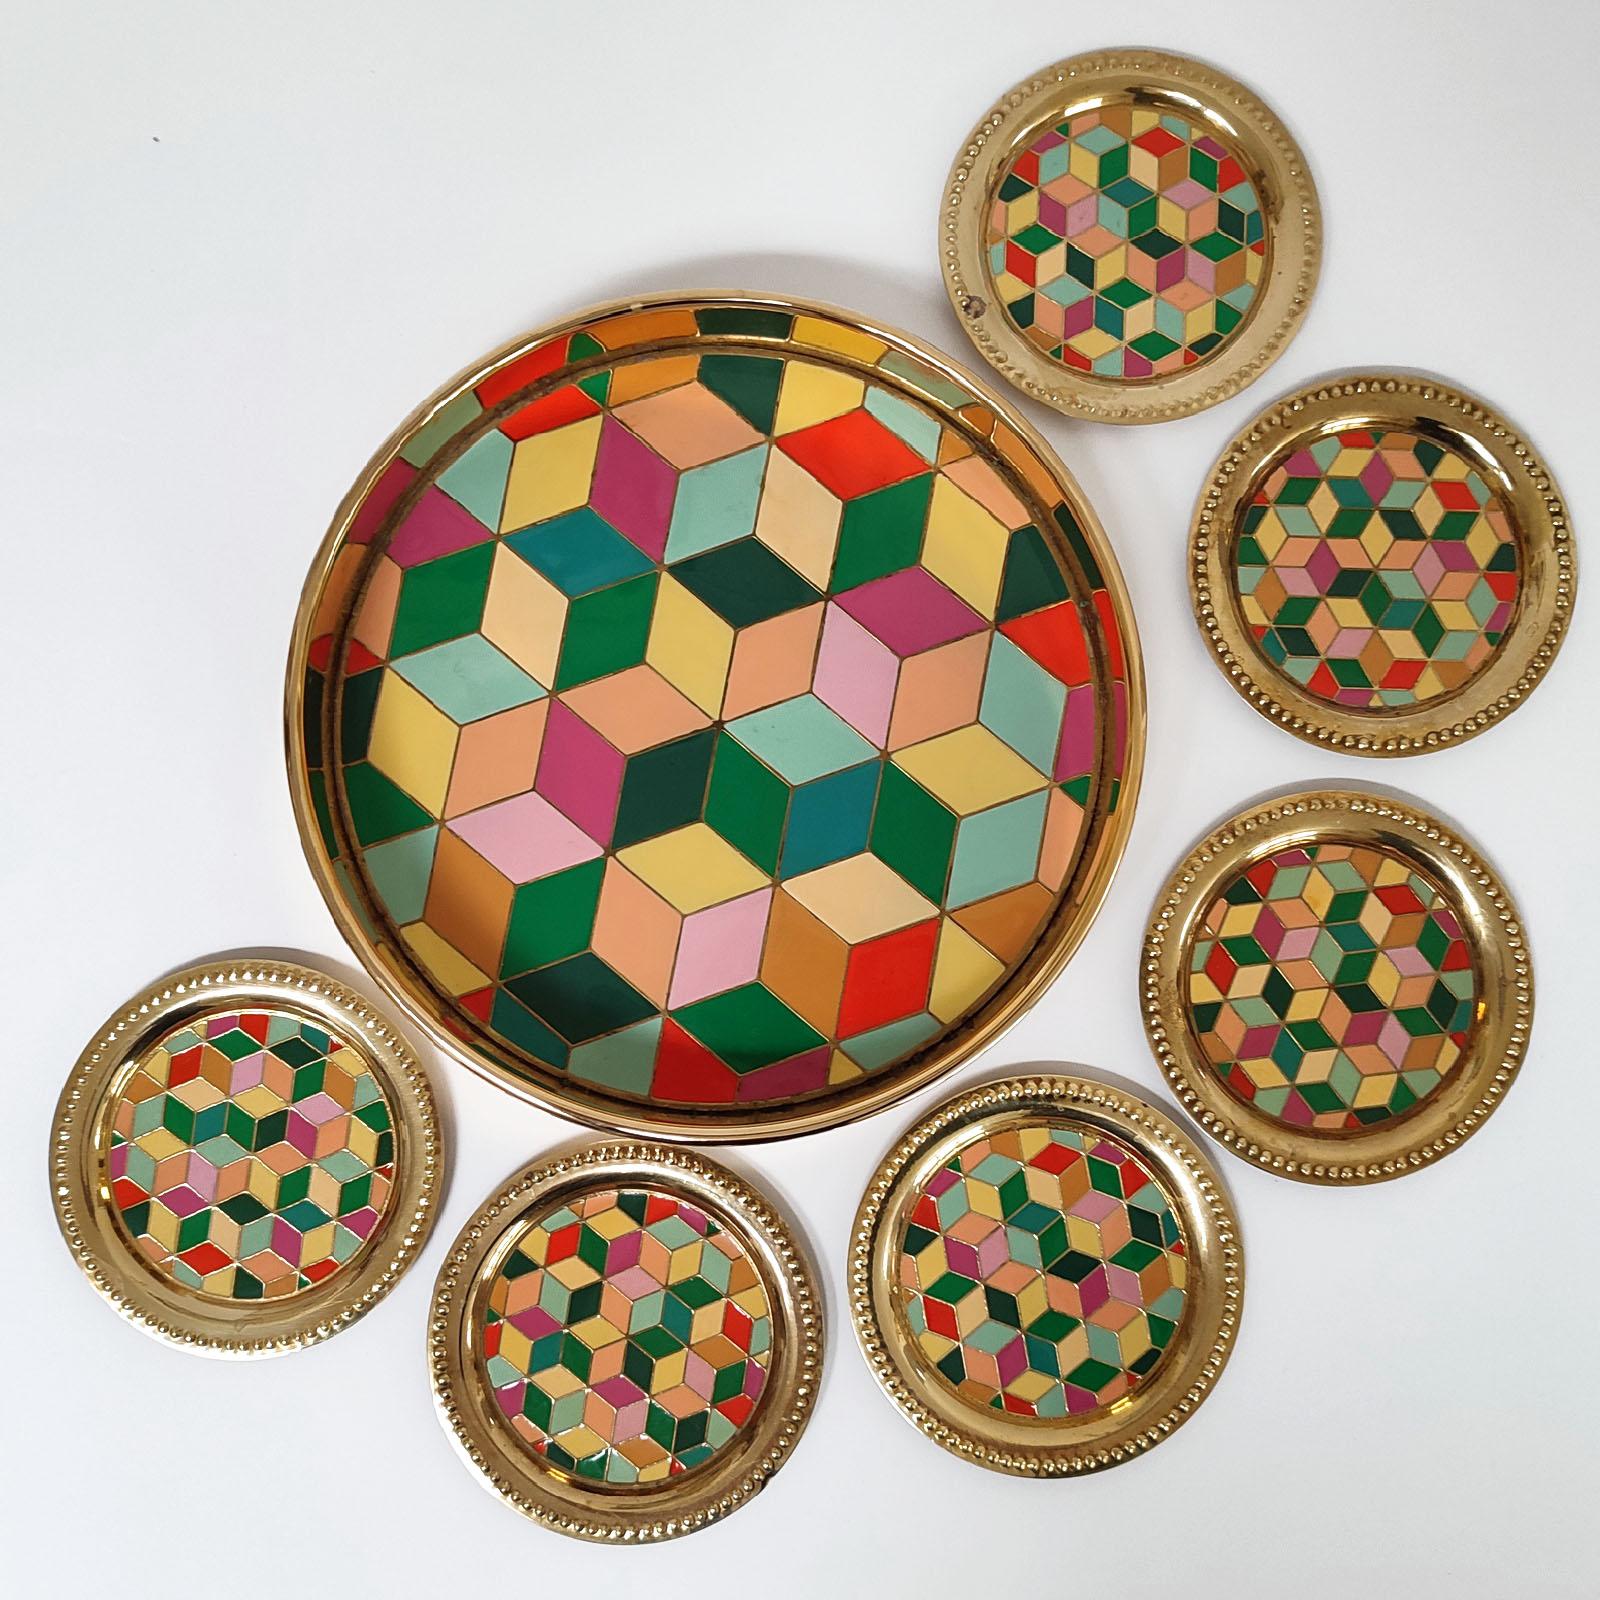 Vintage set of gilt metal and enamel round tray and six coasters, Sweden 1970s
Original label under the bottom.
In very good original condition, minor spots of oxidation to one coaster.
Measures: Tray diameter 24cm
Coaster diameter 11.5 cm.